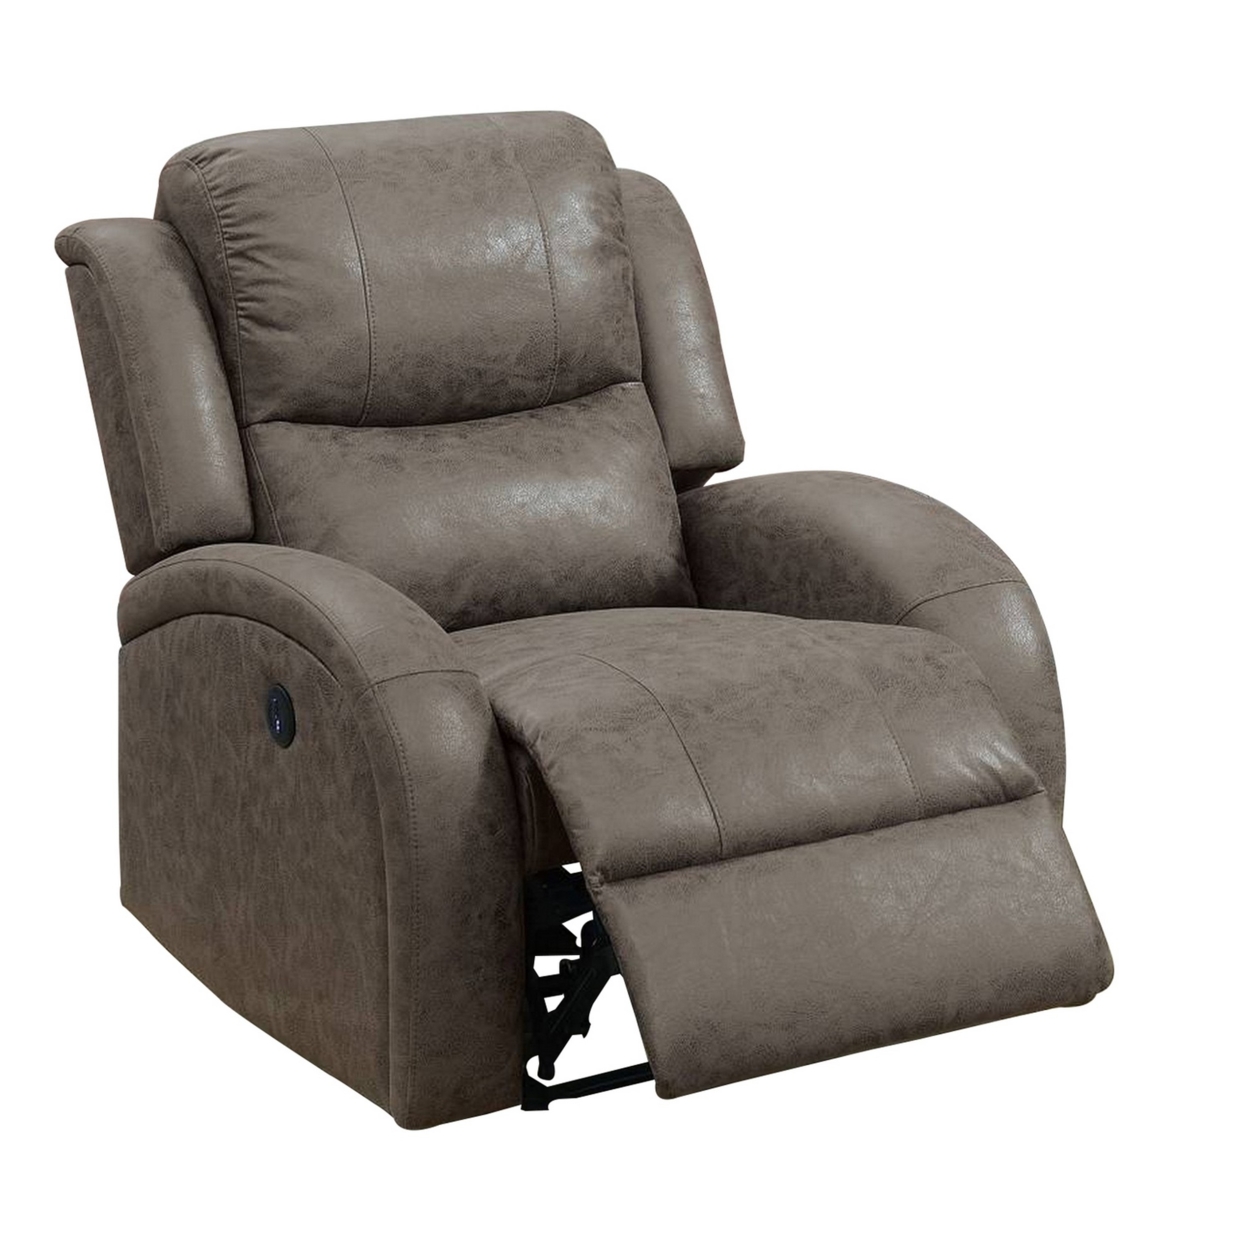 40 Inch Leatherette Power Recliner With USB Port, Brown- Saltoro Sherpi